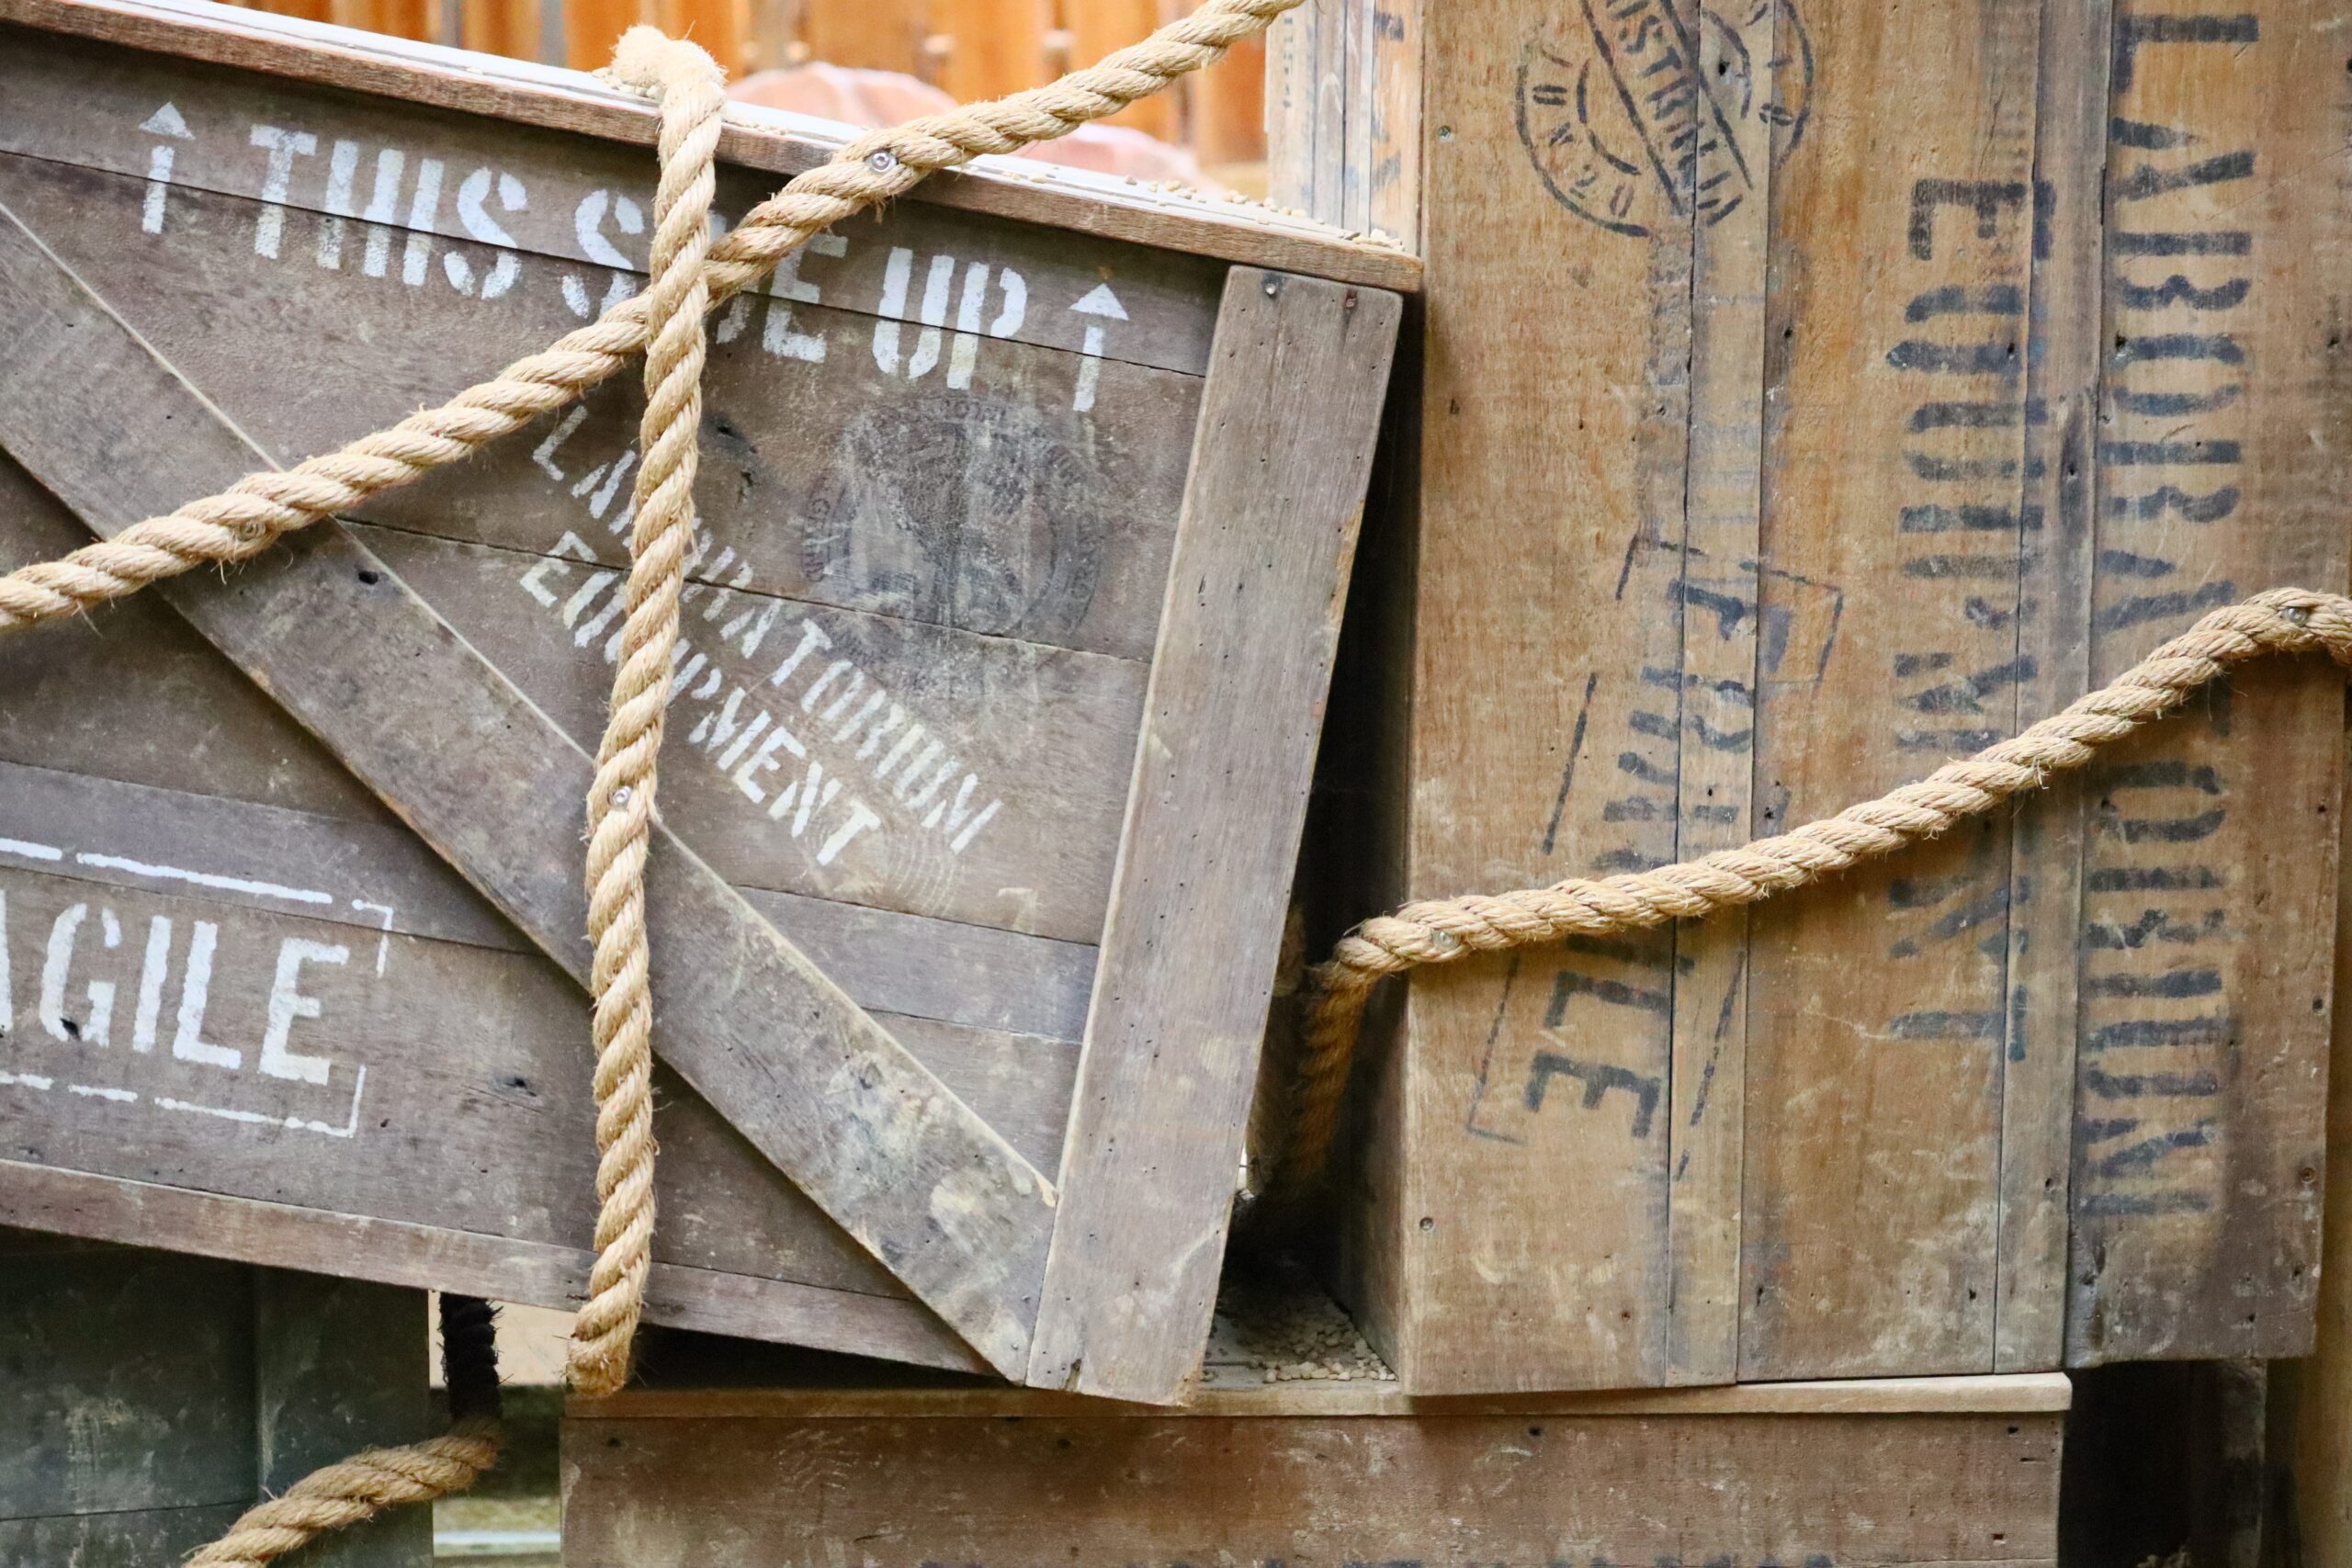 A wooden box with text written on them and ropes around them